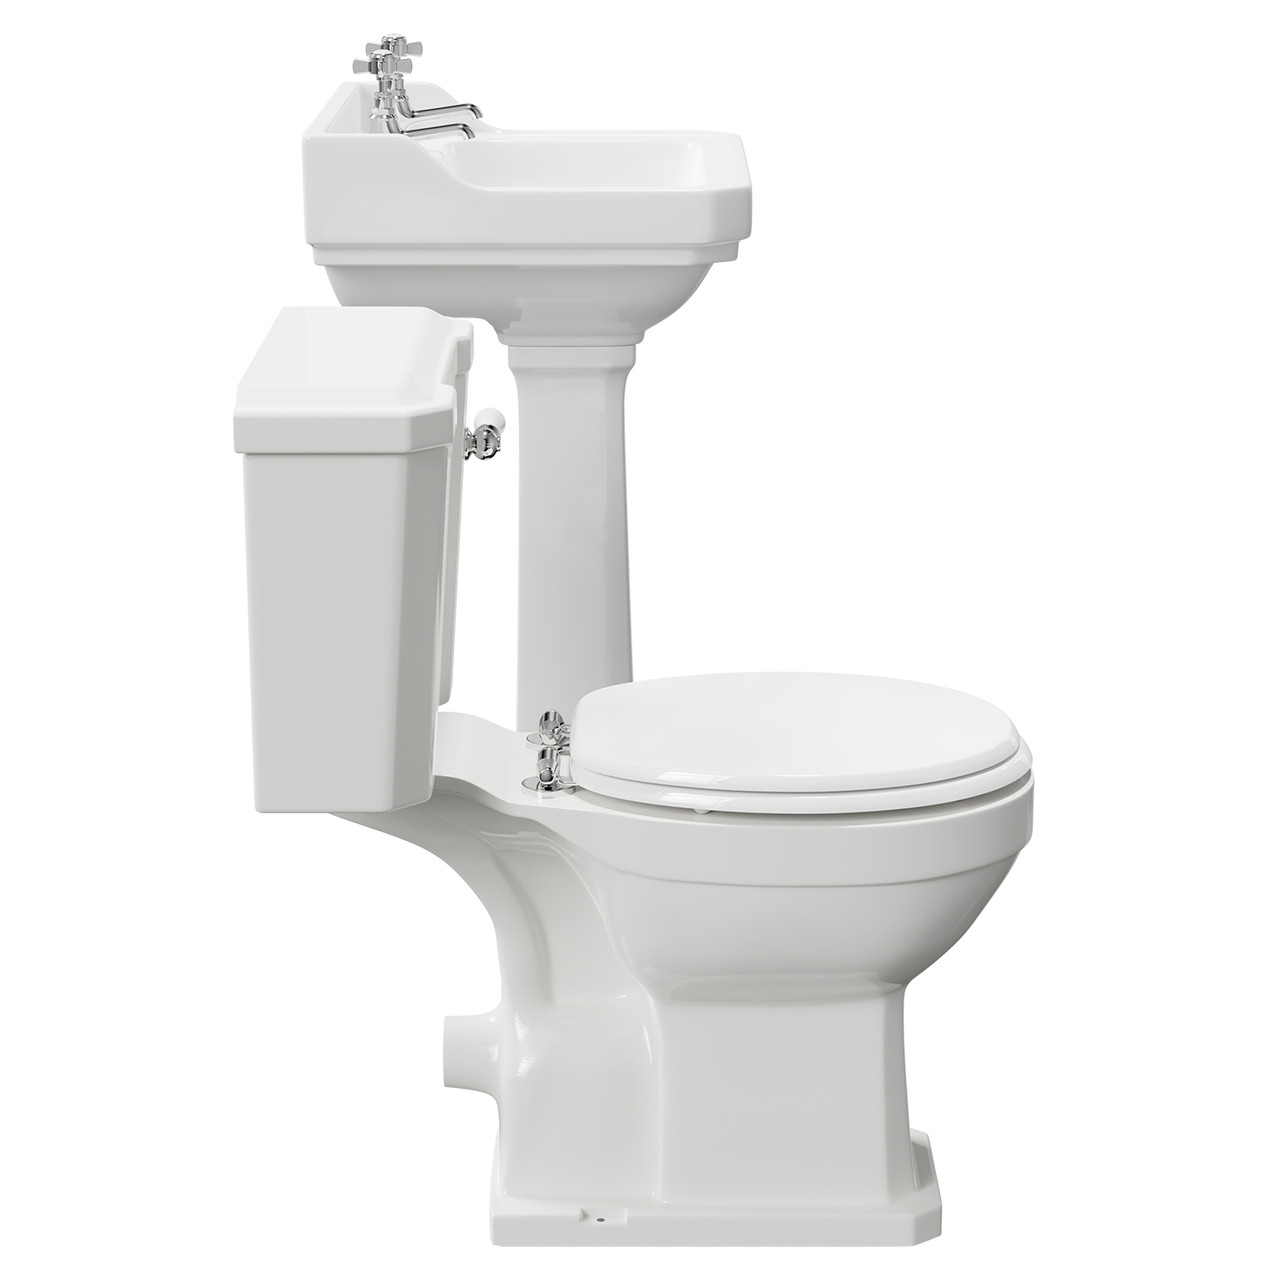 2 Piece Traditional White Bathroom Suite including Basin Sink with Full Pedestal and Toilet WC Set Milano Windsor 